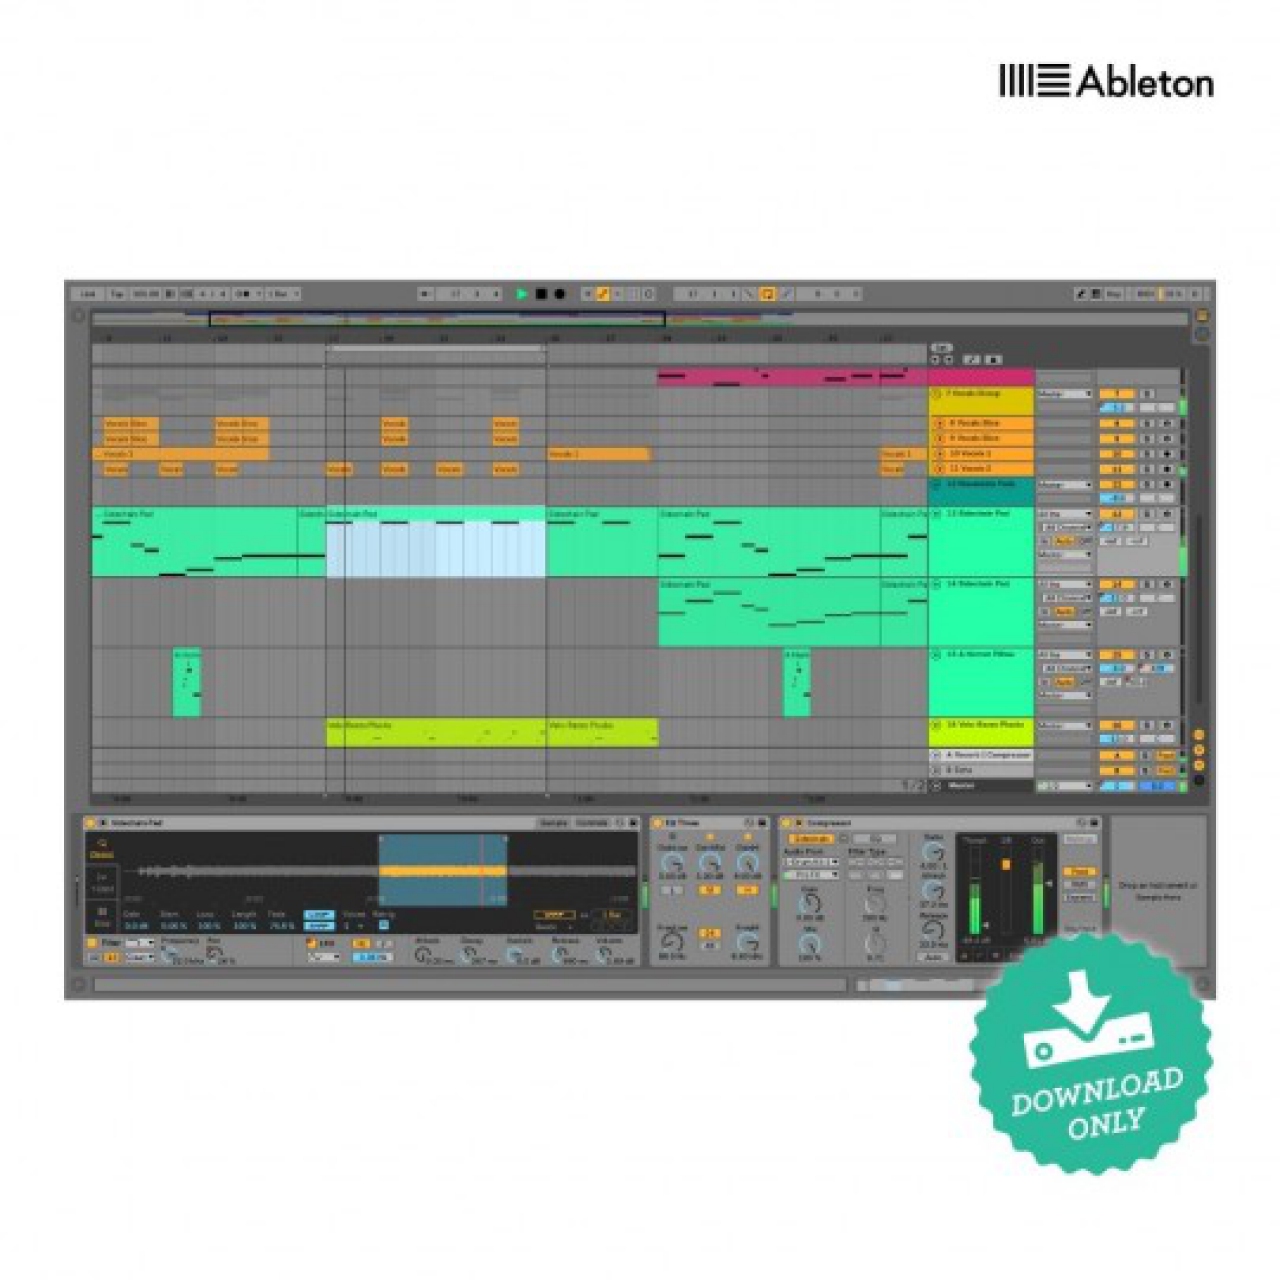 Top midi keyboards for ableton